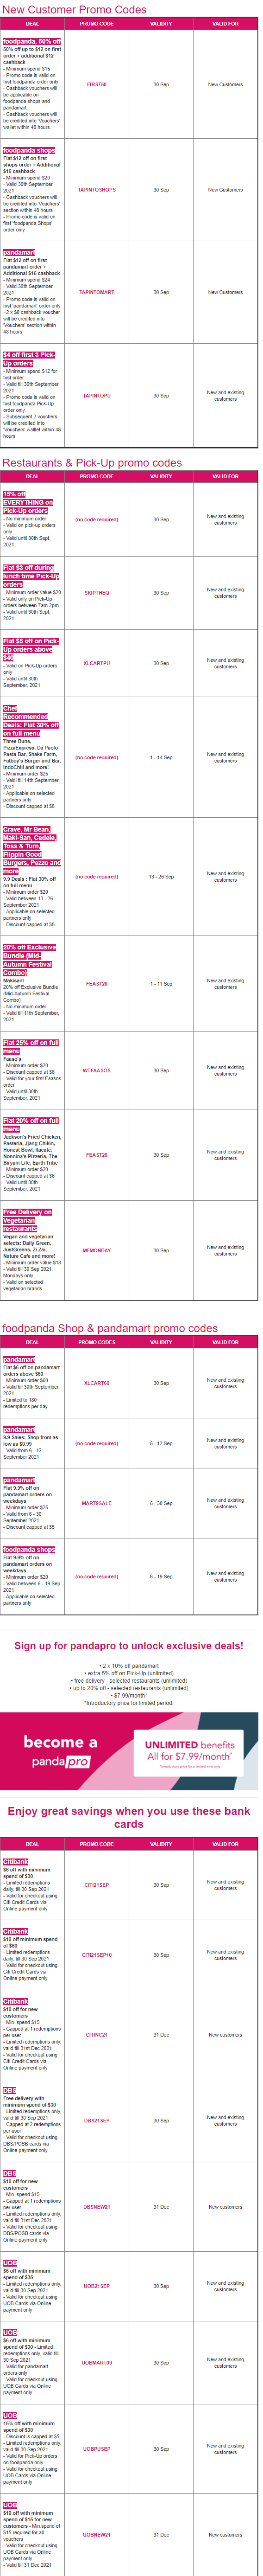 21 foodpanda promo codes for use in the month of September 2021 - 1